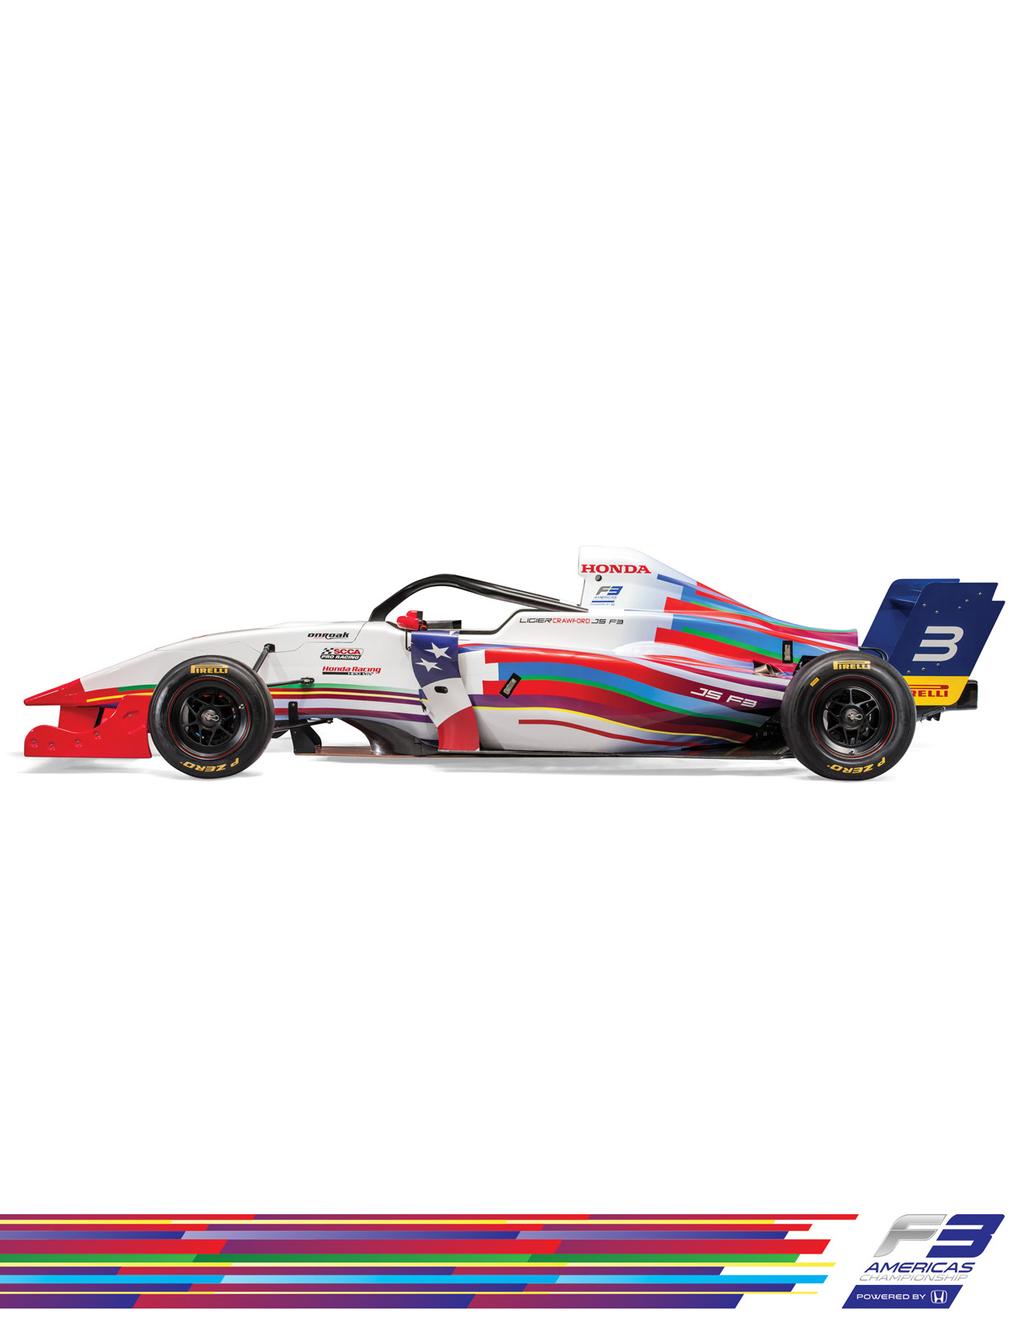 the next step 6 The future of open-wheel formula racing in the Western Hemisphere now has defined path. Ideally, competitors from the F4 U.S.